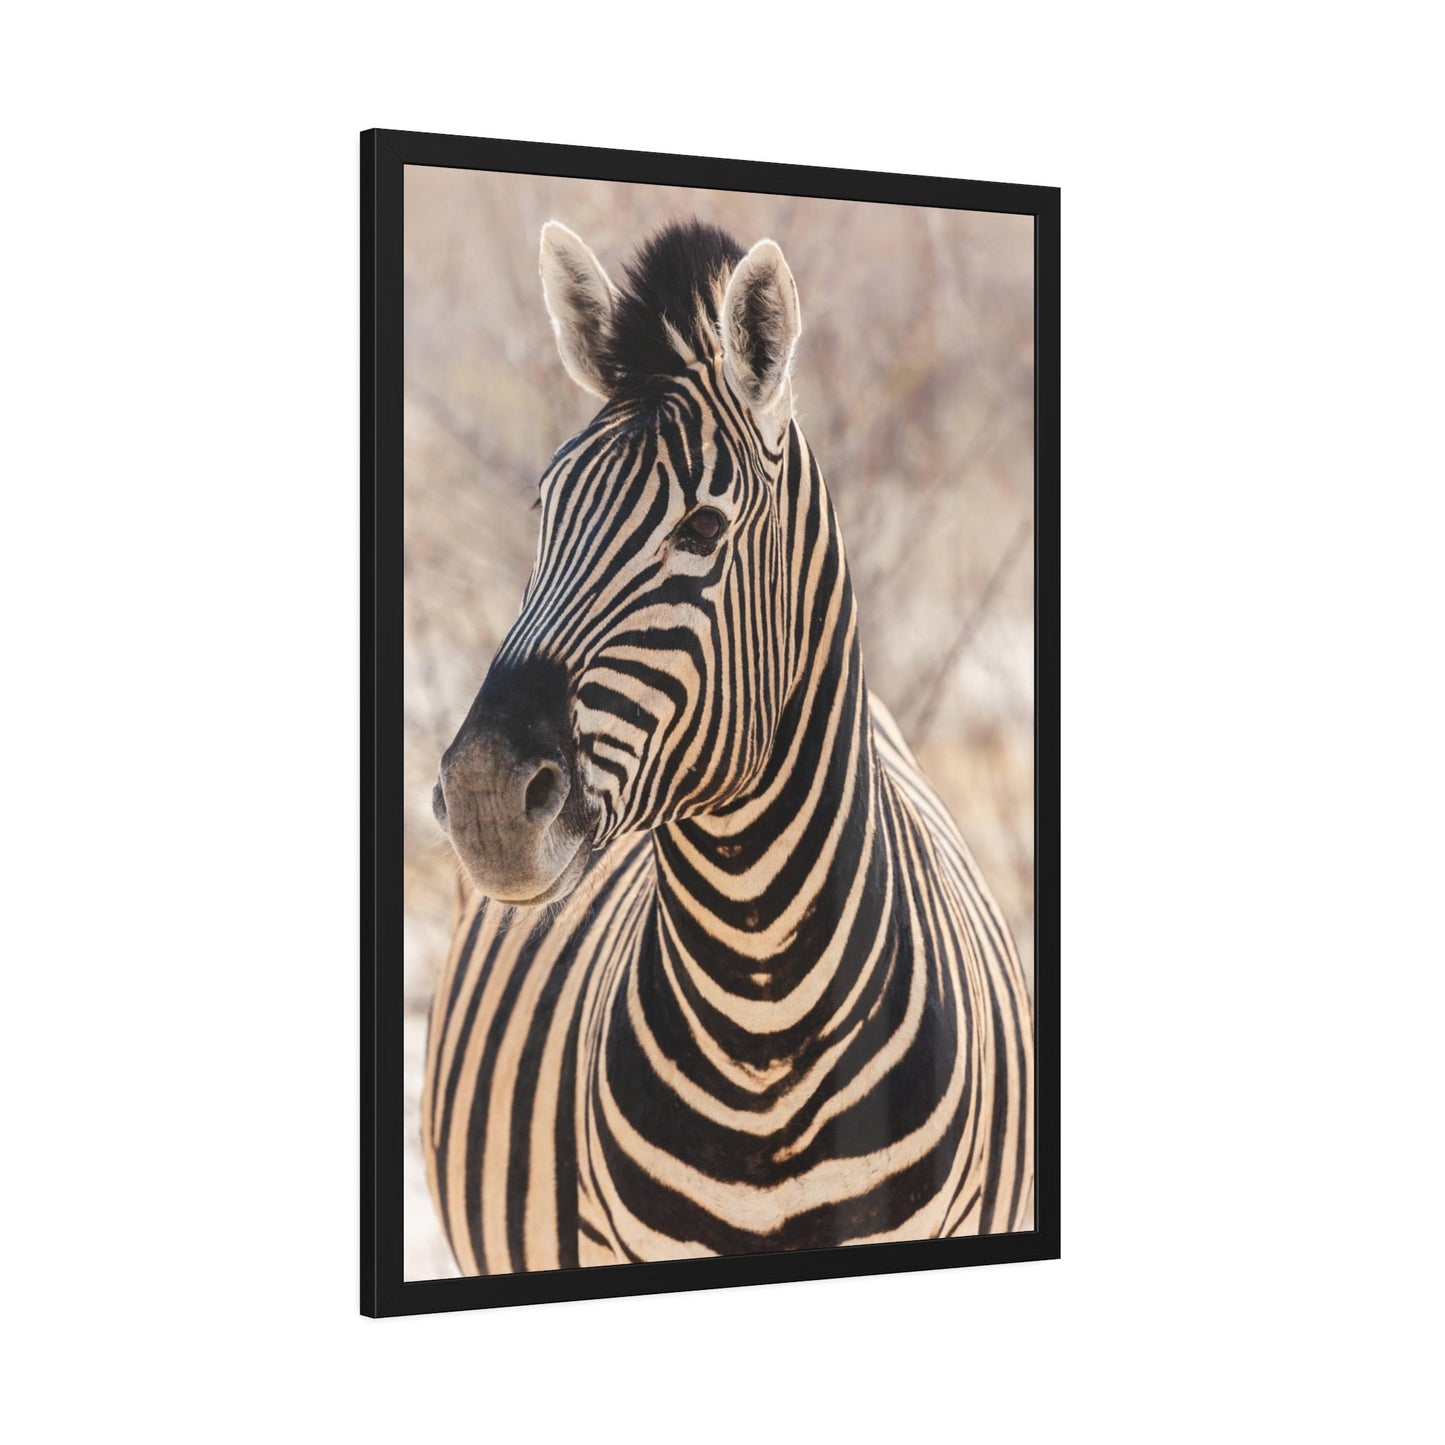 Zebras in the Wild: Stunning Print on Framed Canvas